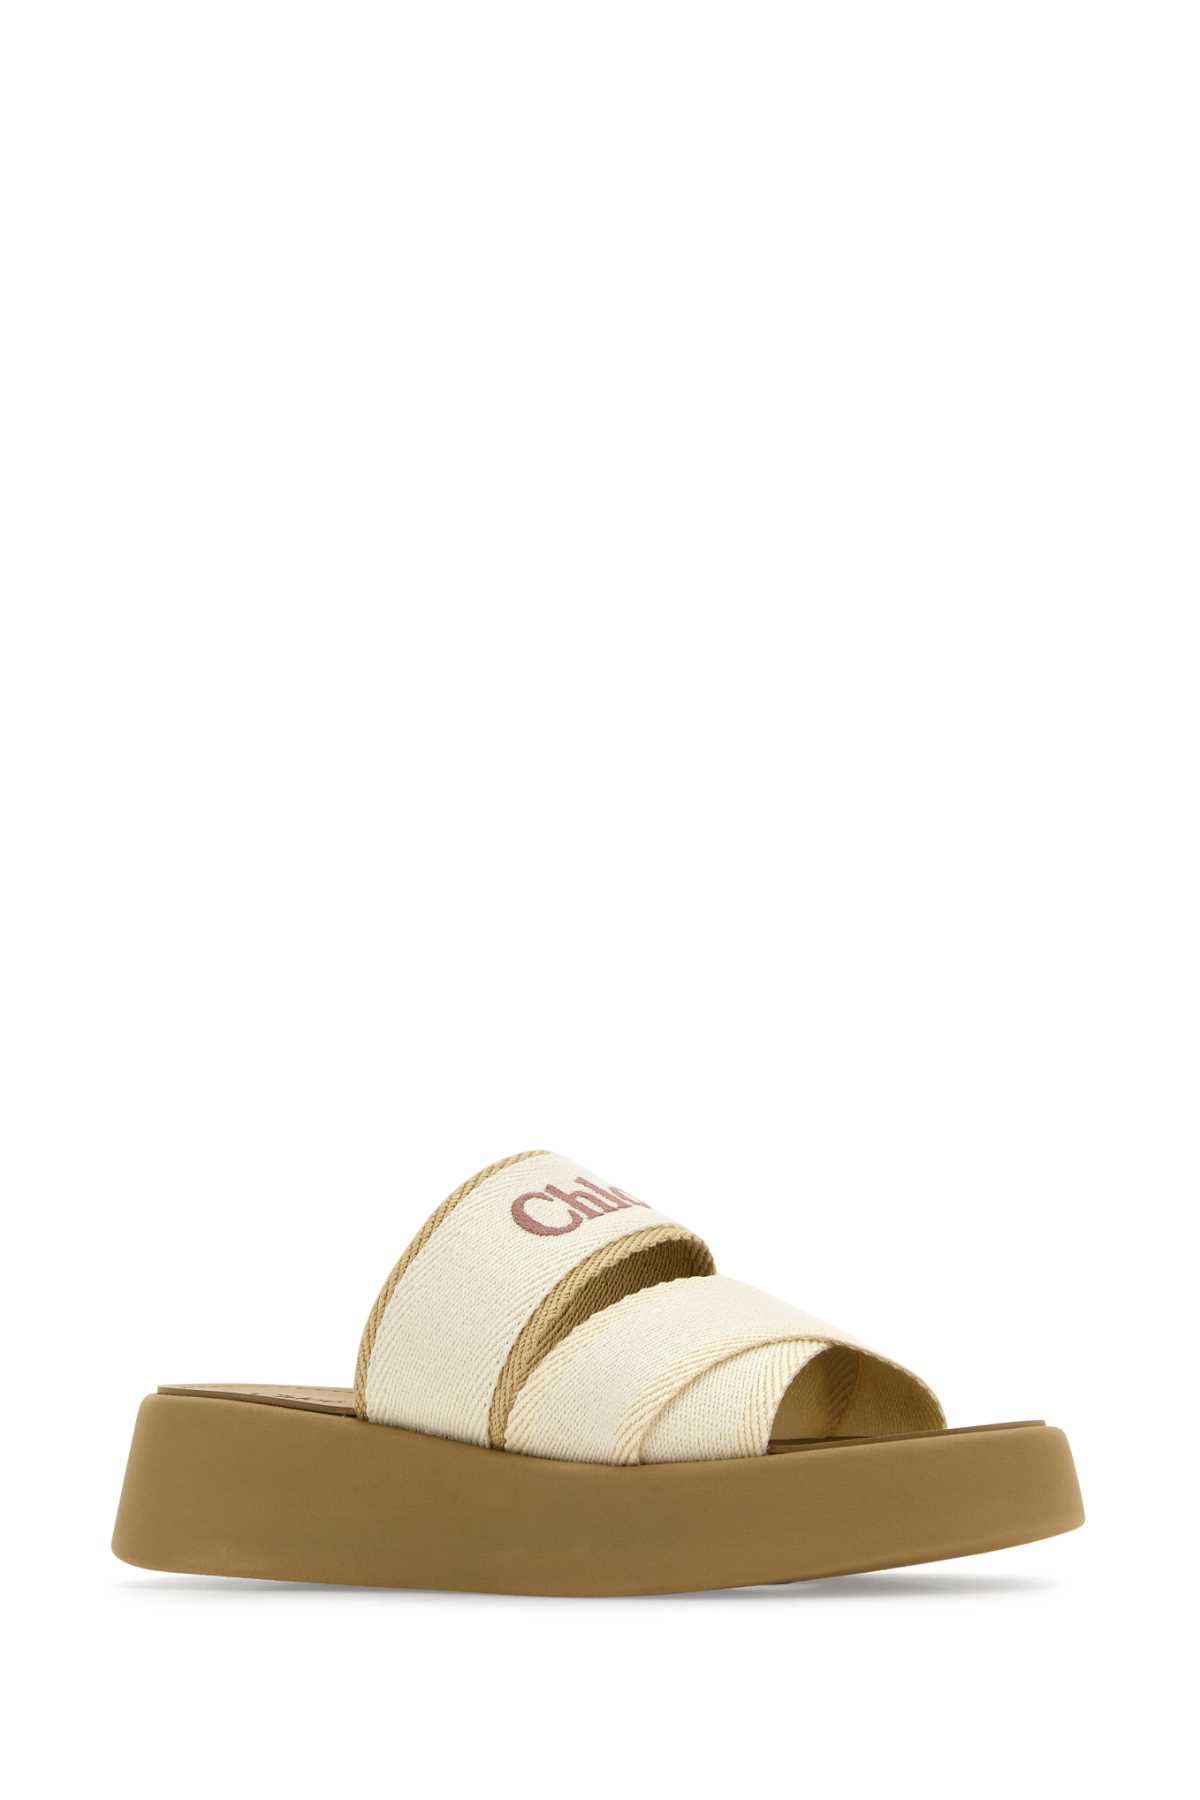 CHLOÉ TWO-TONE CANVAS MILA SLIPPERS